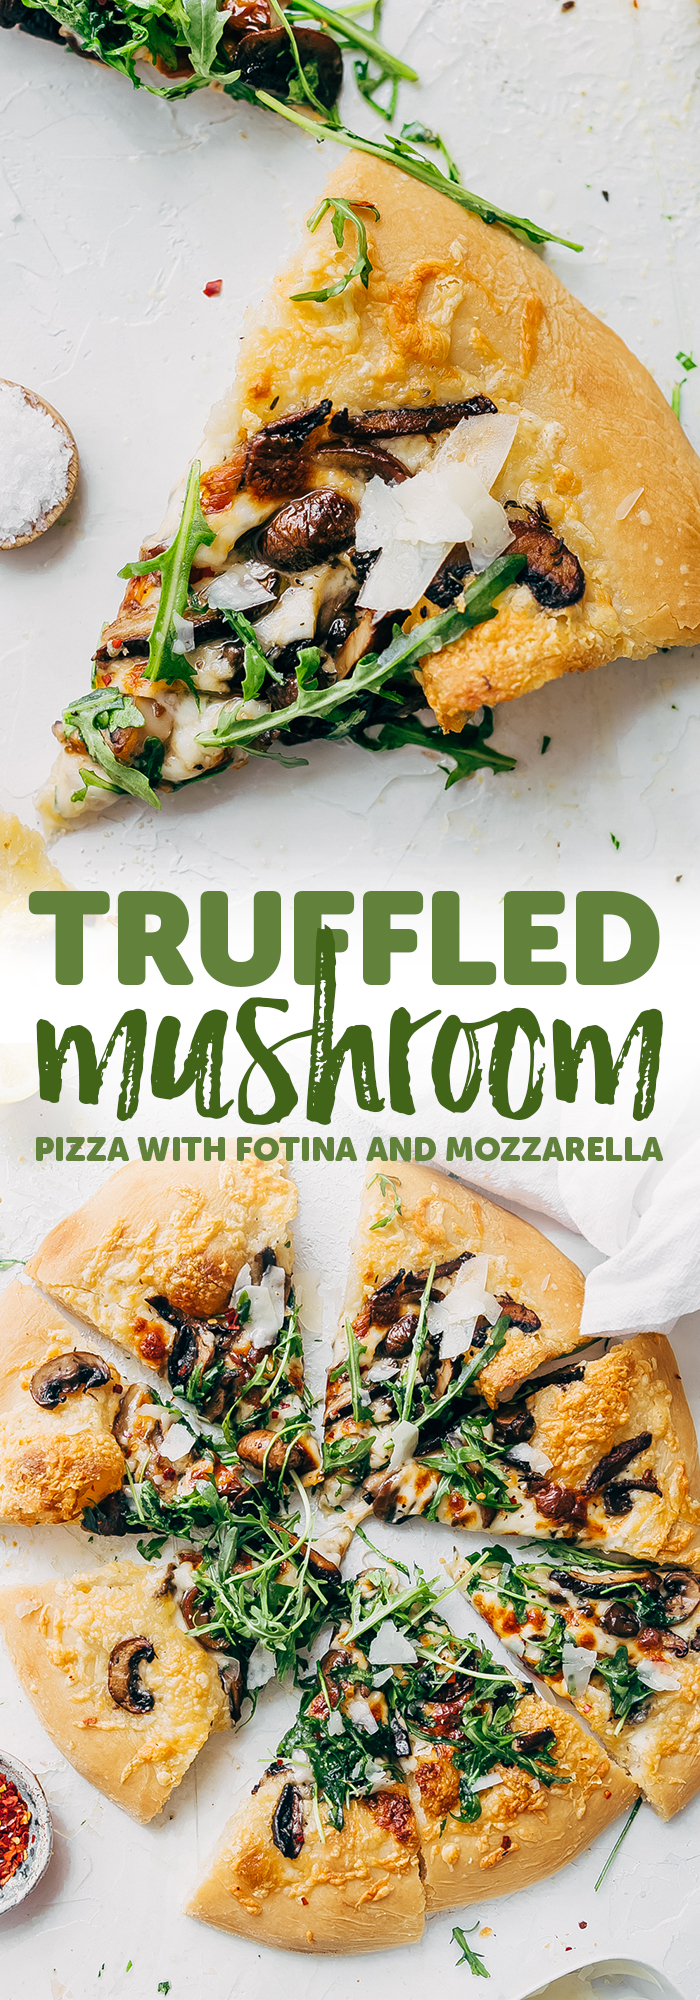 Truffled Mushroom Pizza - learn how to make a quick and easy truffled mushroom pizza! Topped with two kinds of cheese and it tastes like you ordered in from a fancy pizza shop! #pizzarecipe #mushroompizza #truffledmushroompizza #pizza | Littlespicejar.com